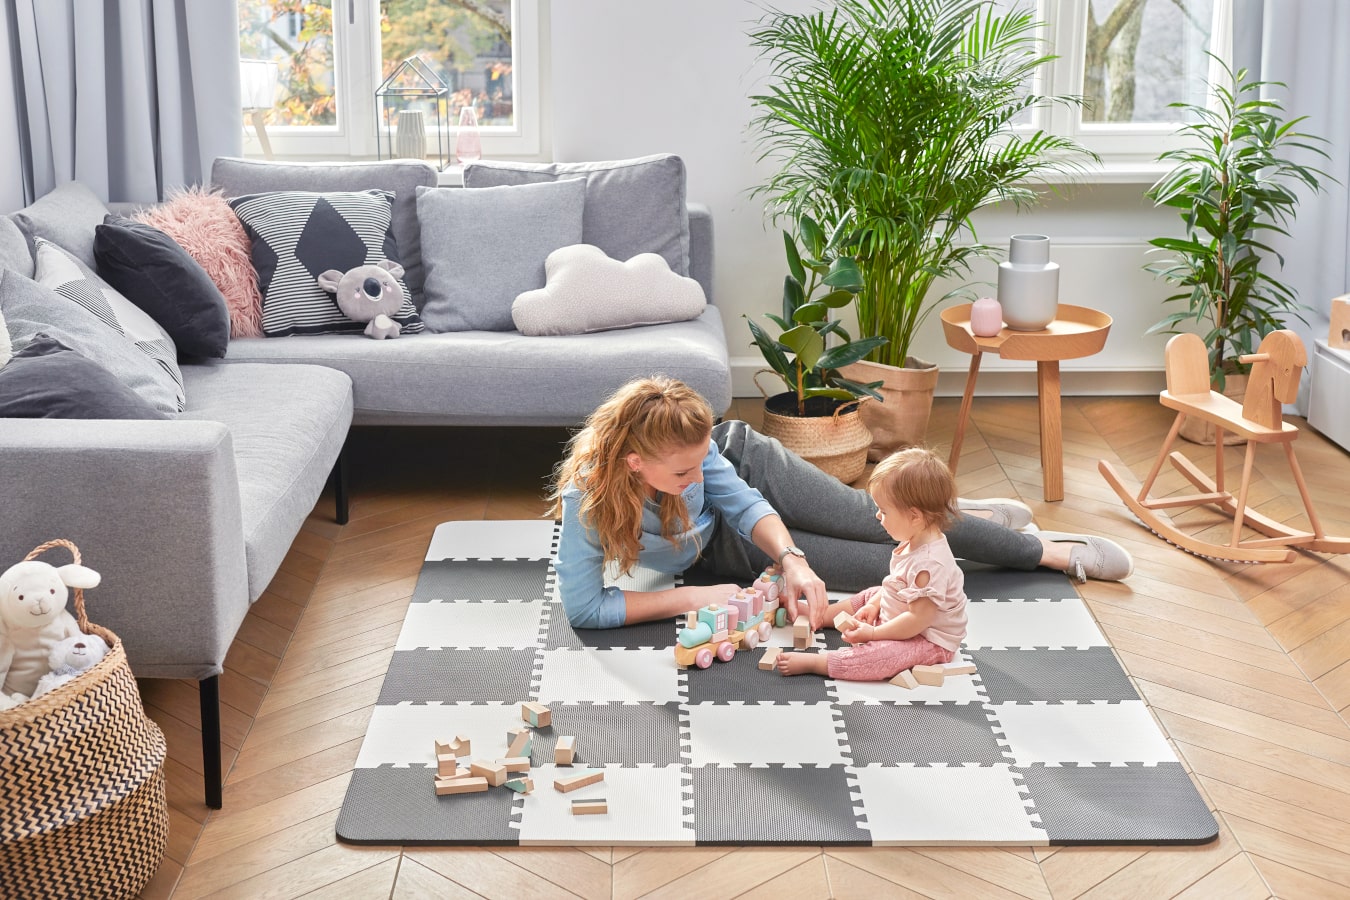 Mum with a small girl together in the living room playing on the luno educational mat.  